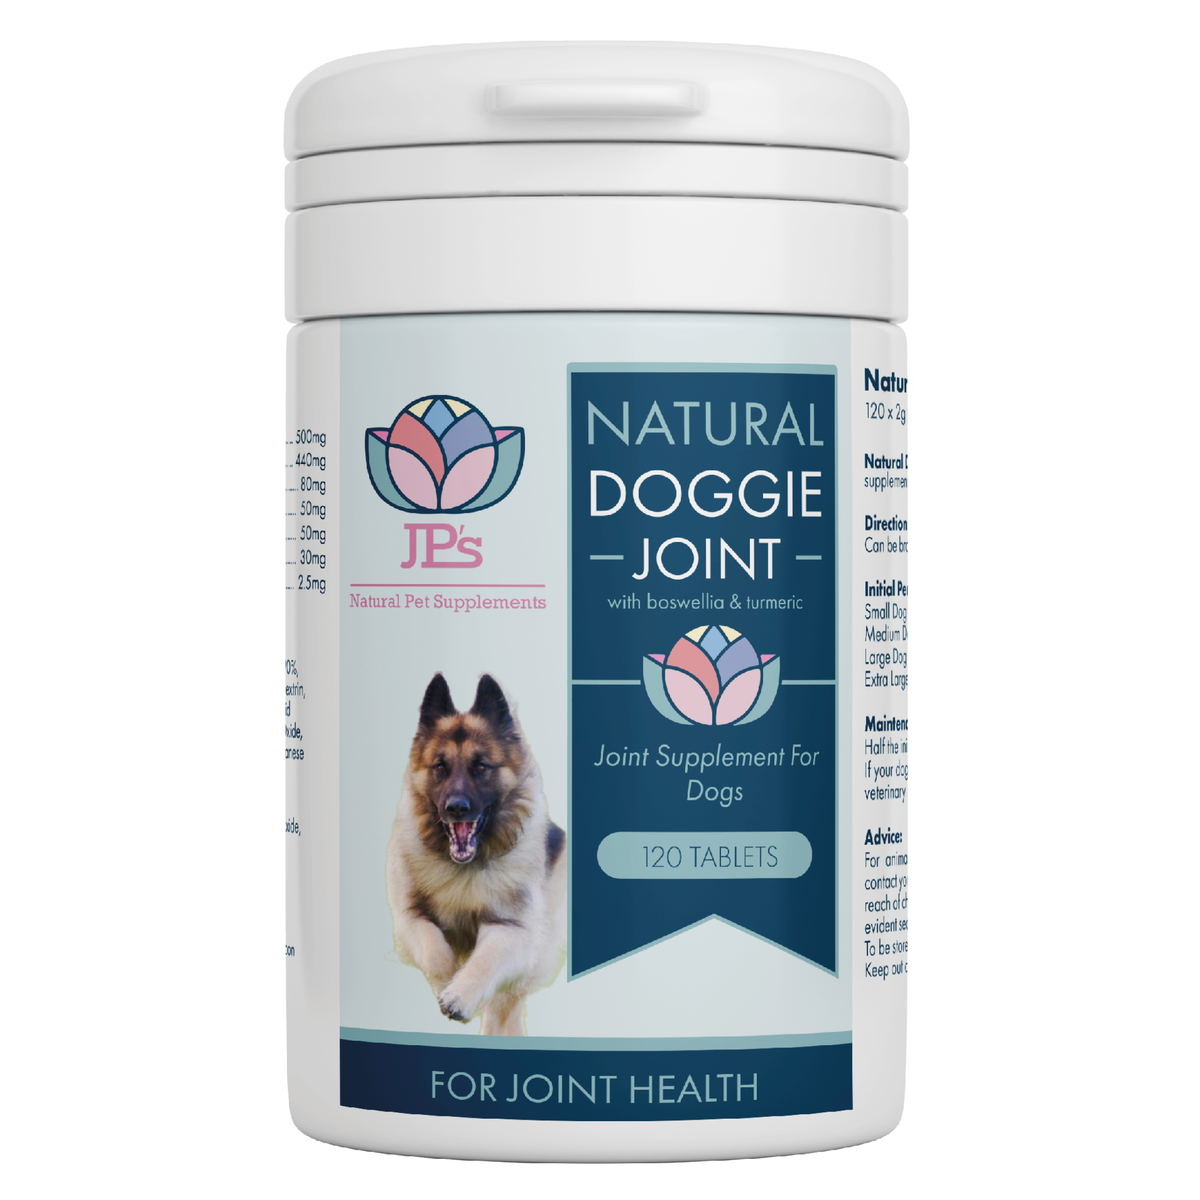 Natural dog joint supplement with boswellia and turmeric